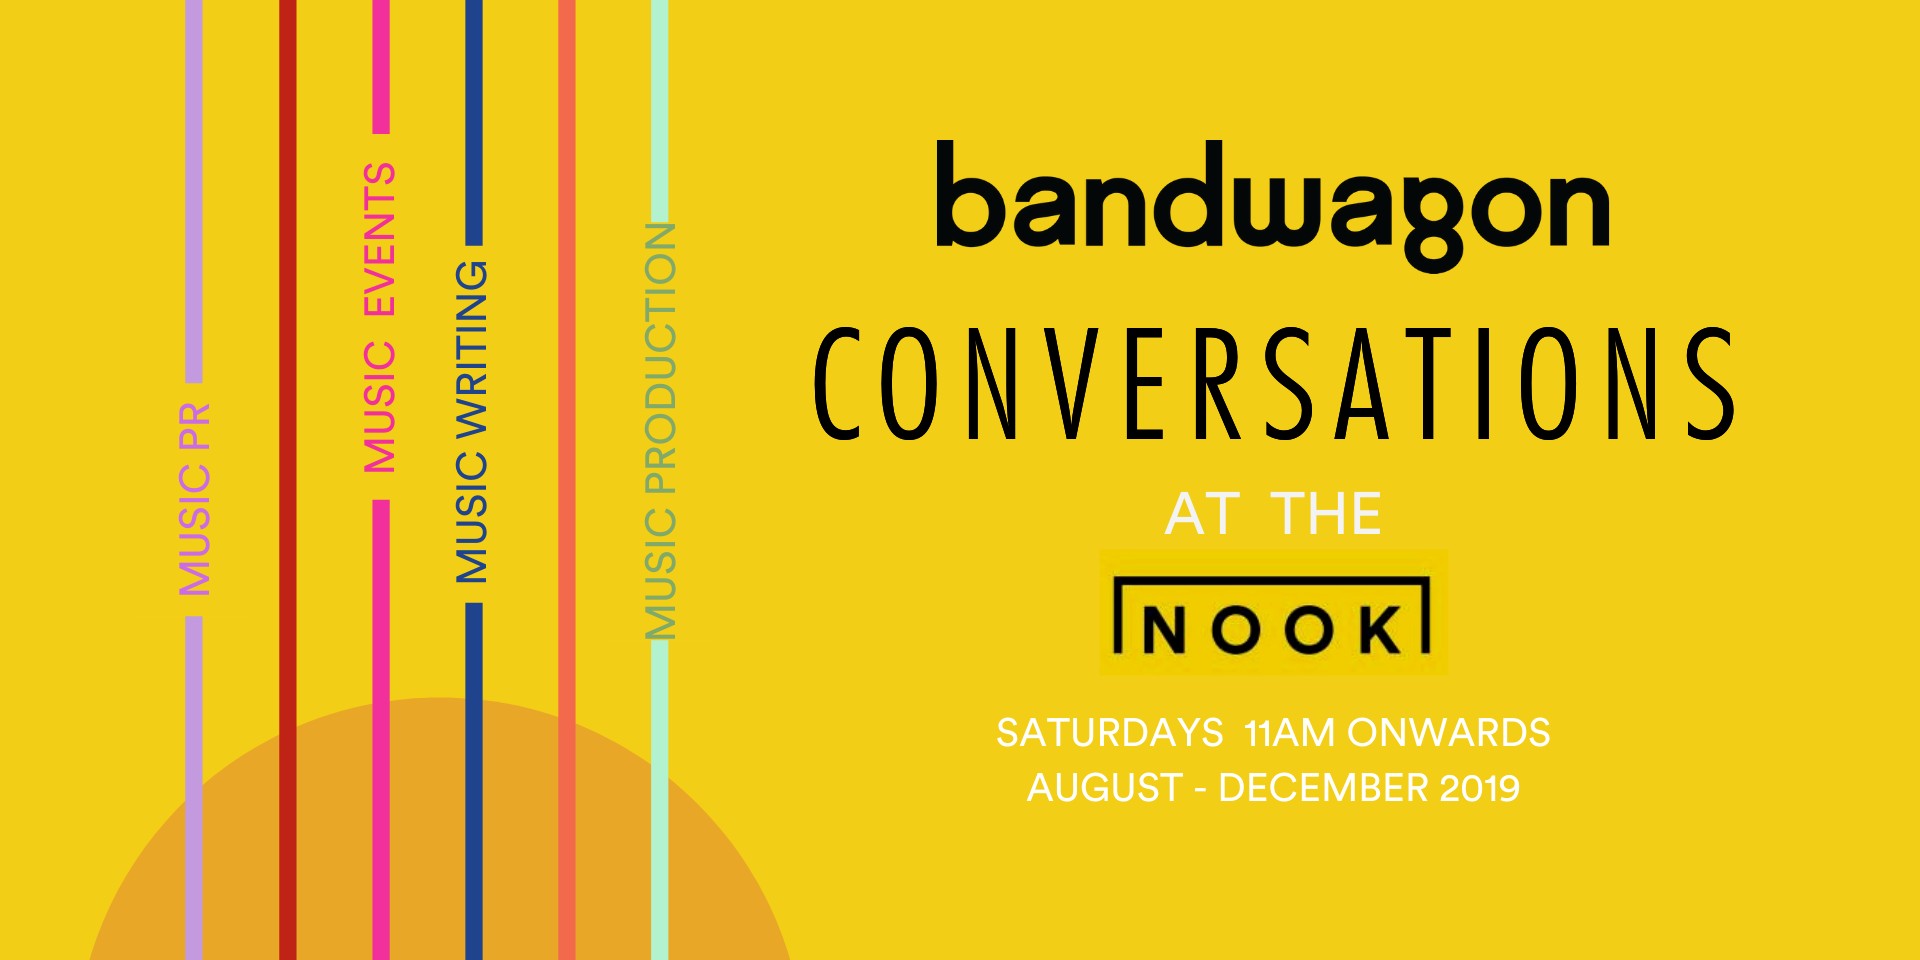 Let your stories be told at Bandwagon Conversations at the Nook